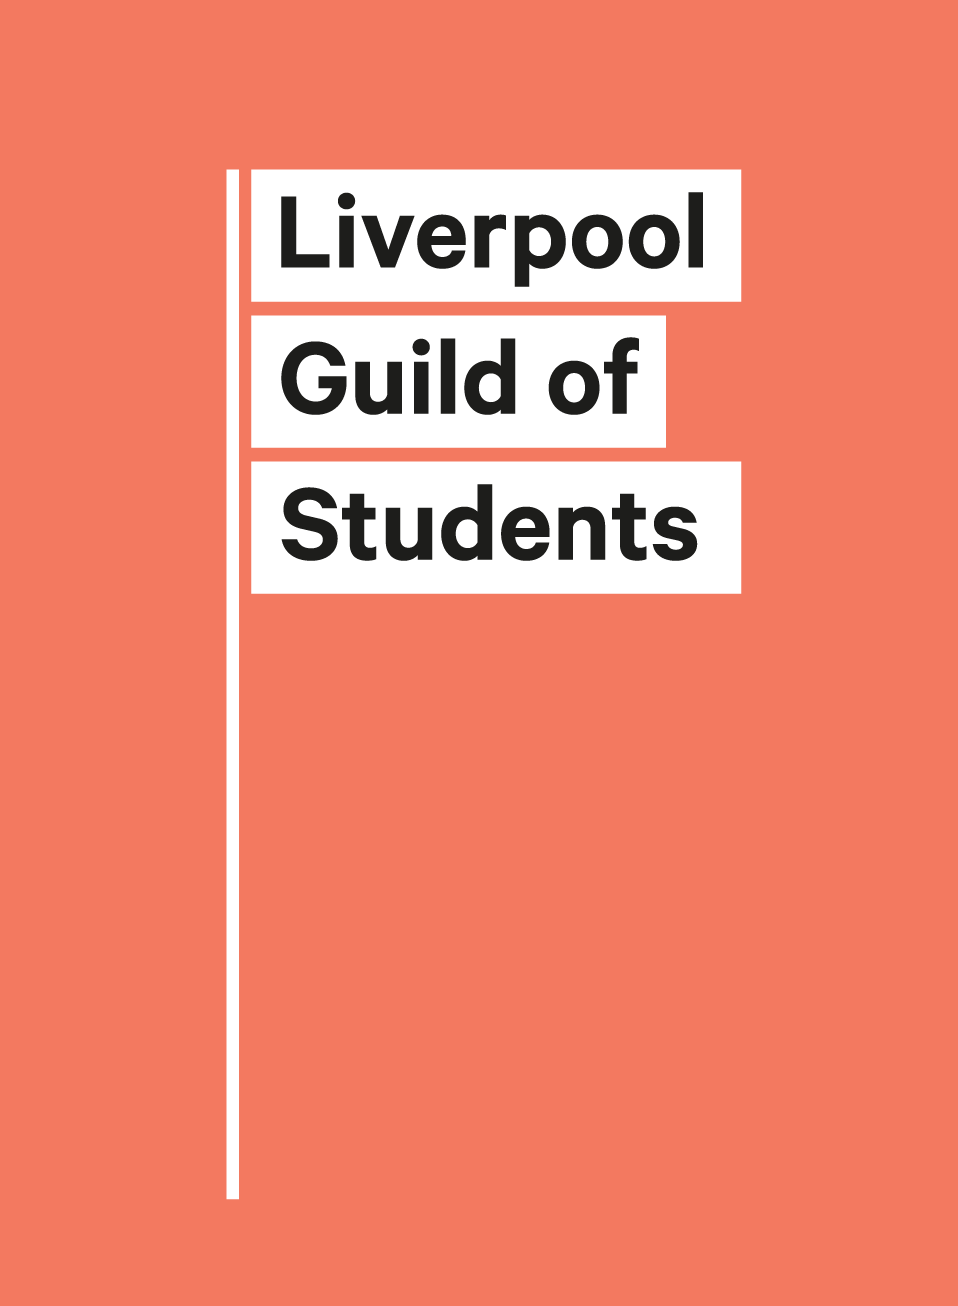 New Logo and Identity for Liverpool Guild of Students by Smiling Wolf